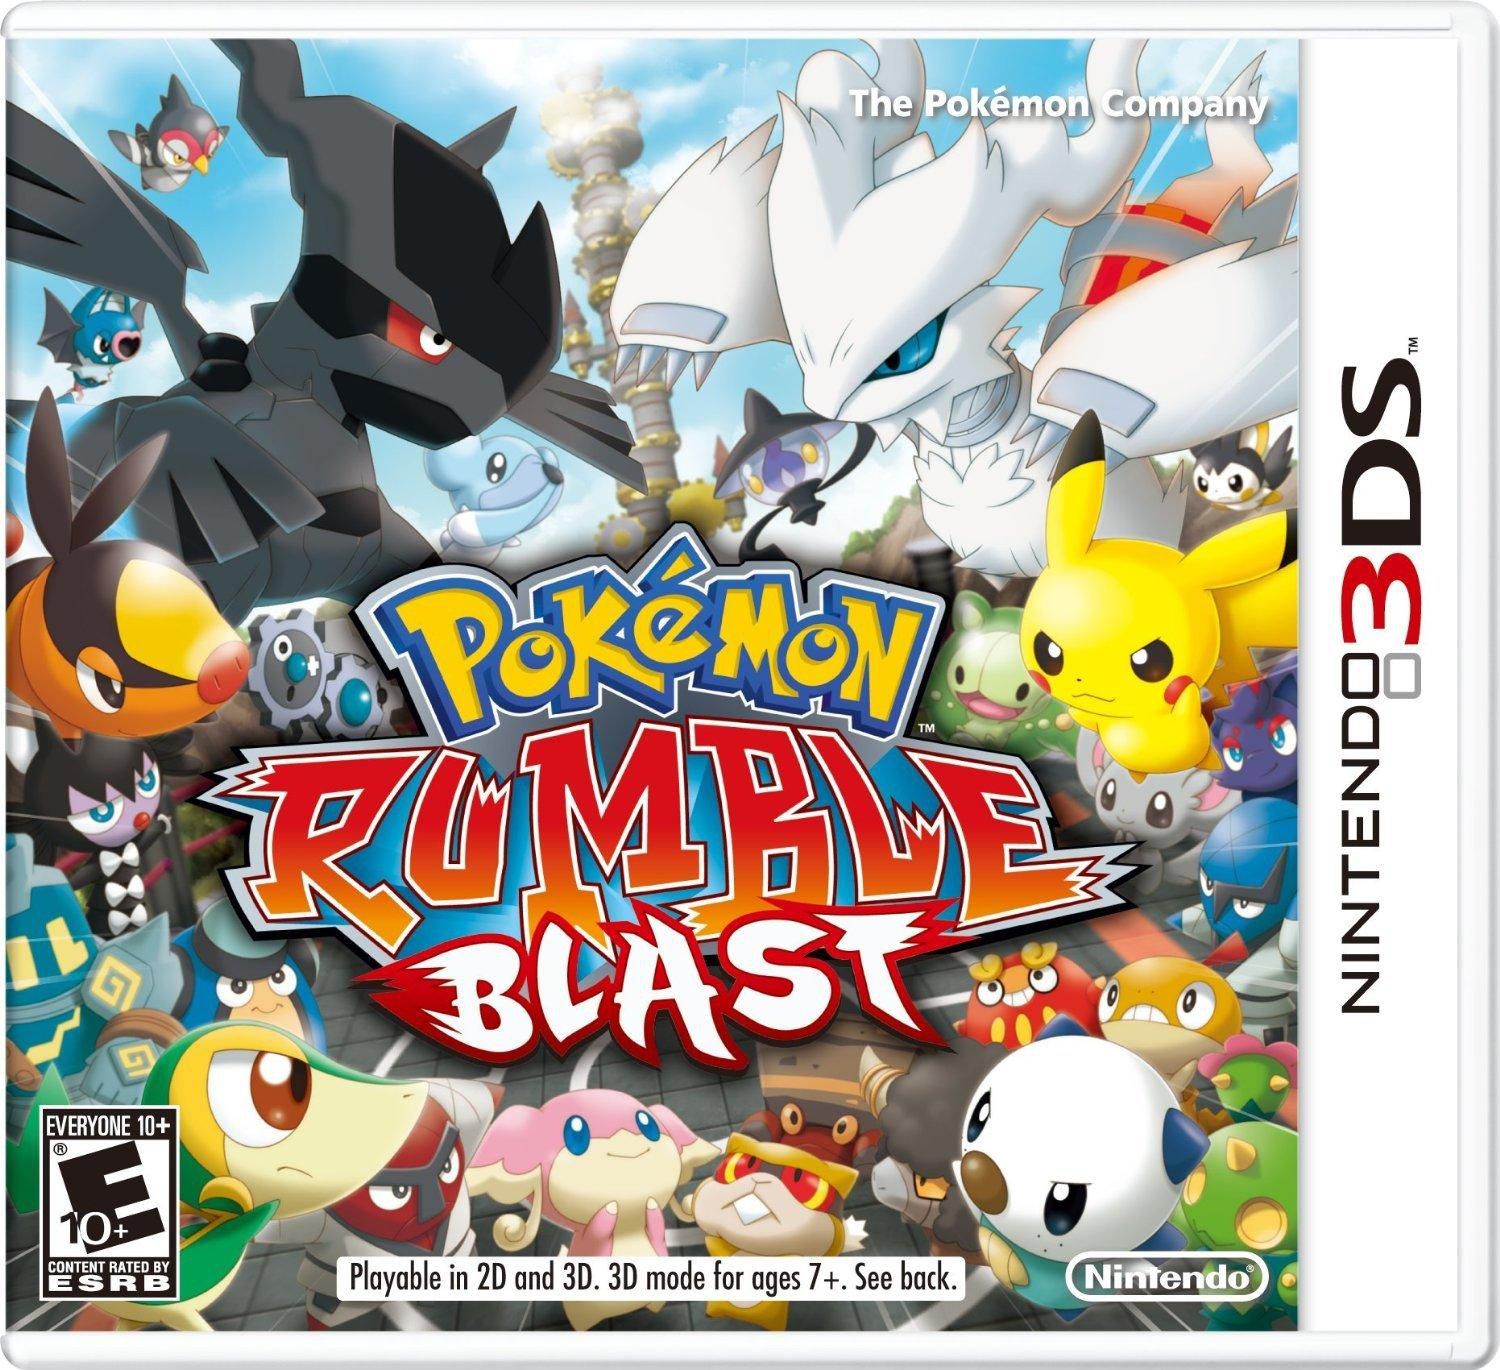 Pokemon Rumble Blast by Nintendo Video Game for 3DS